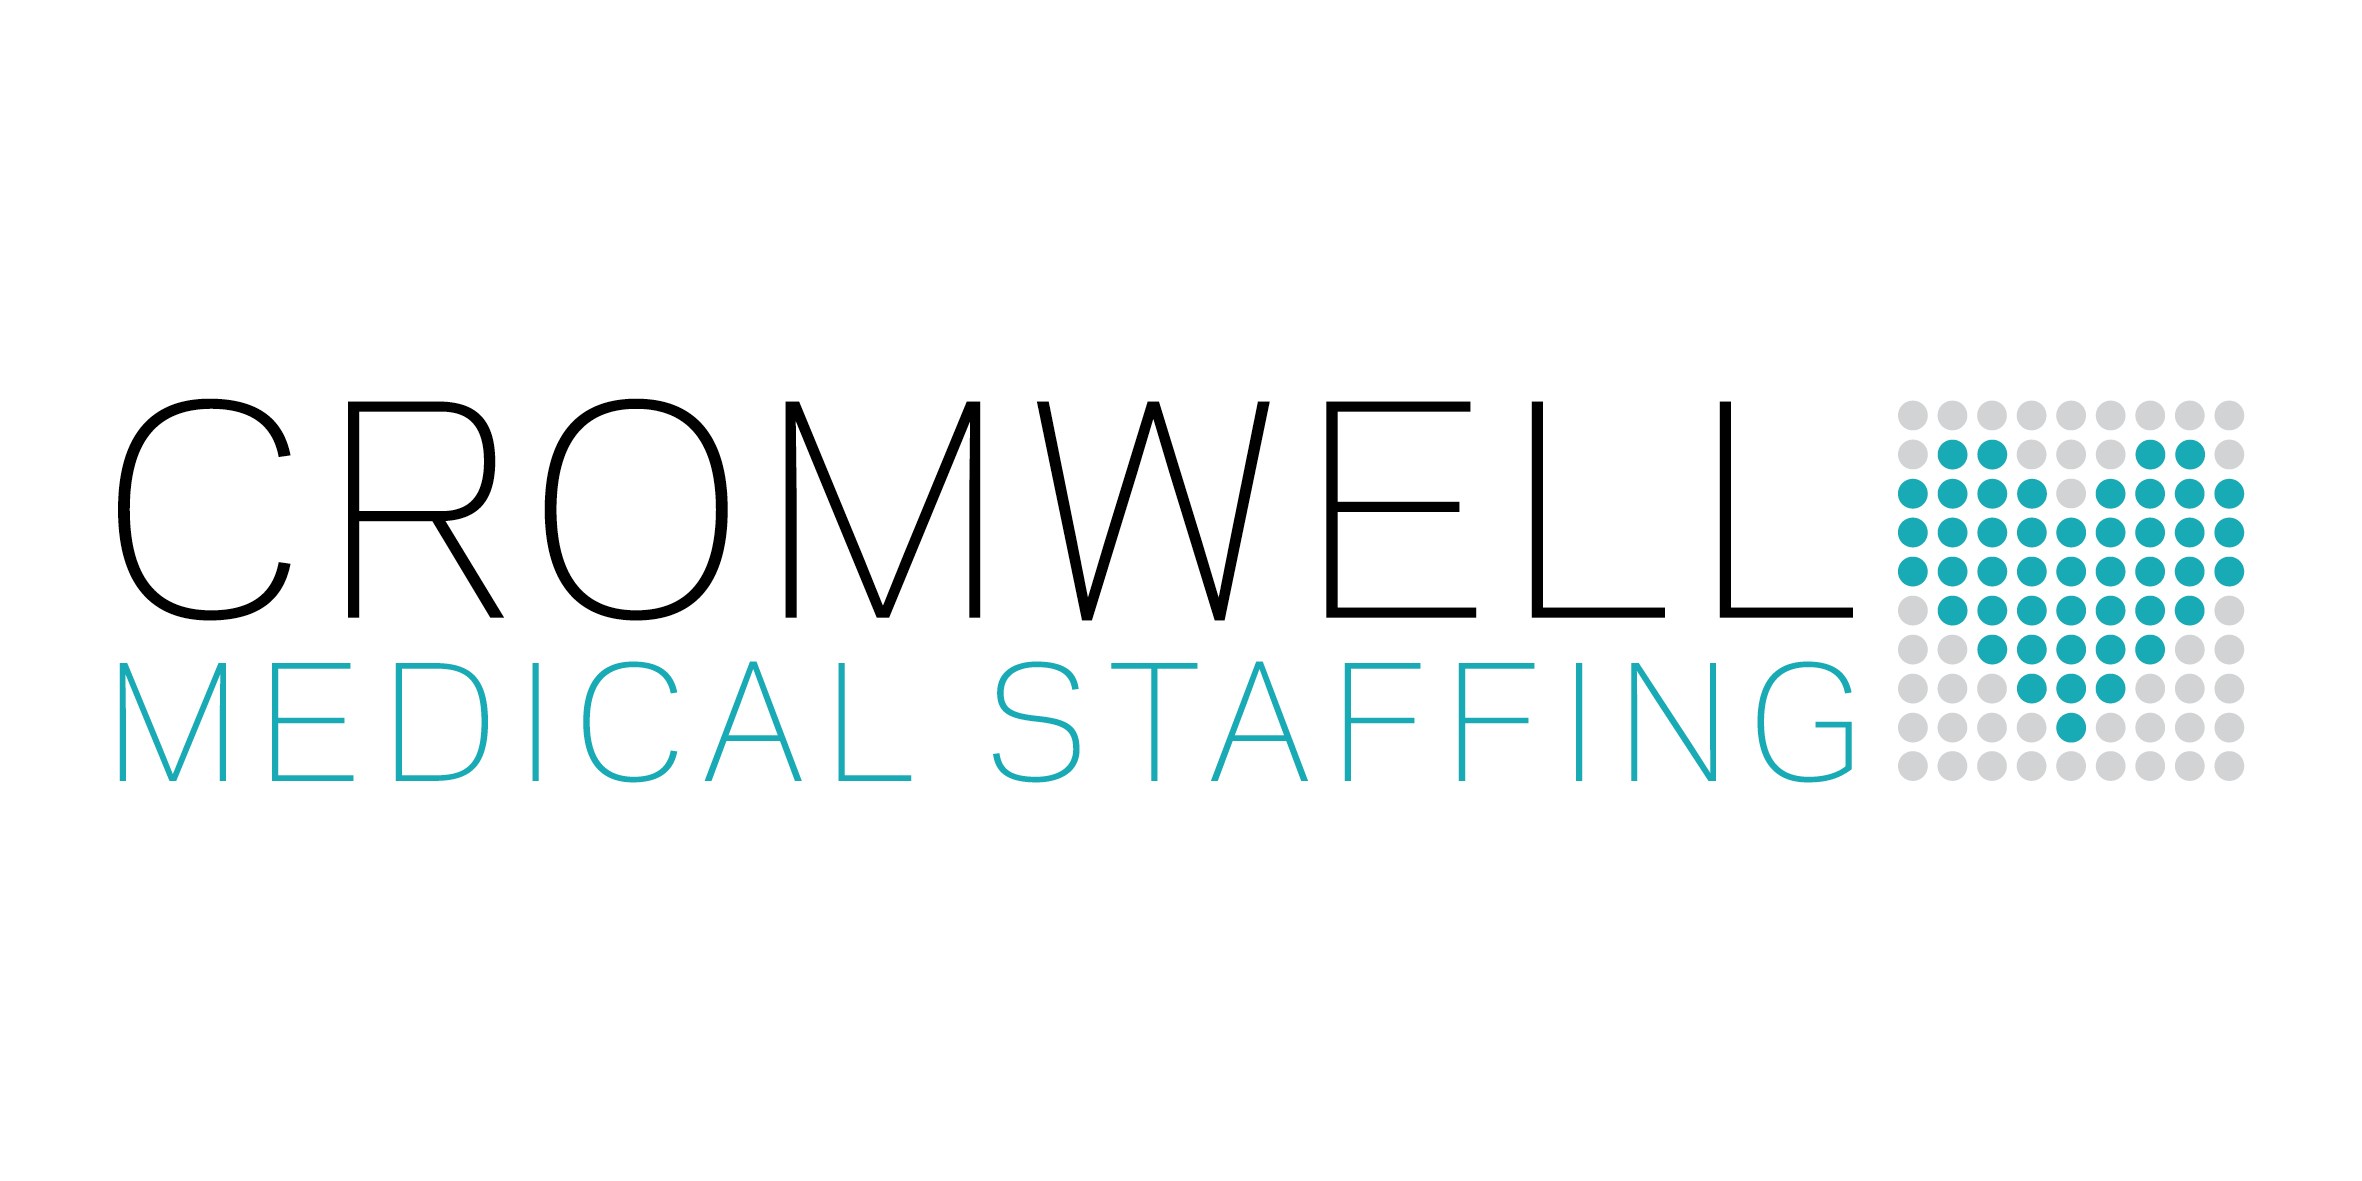 Cromwell Medical Staffing are exhibiting at the Nursing Careers and Jobs Fair